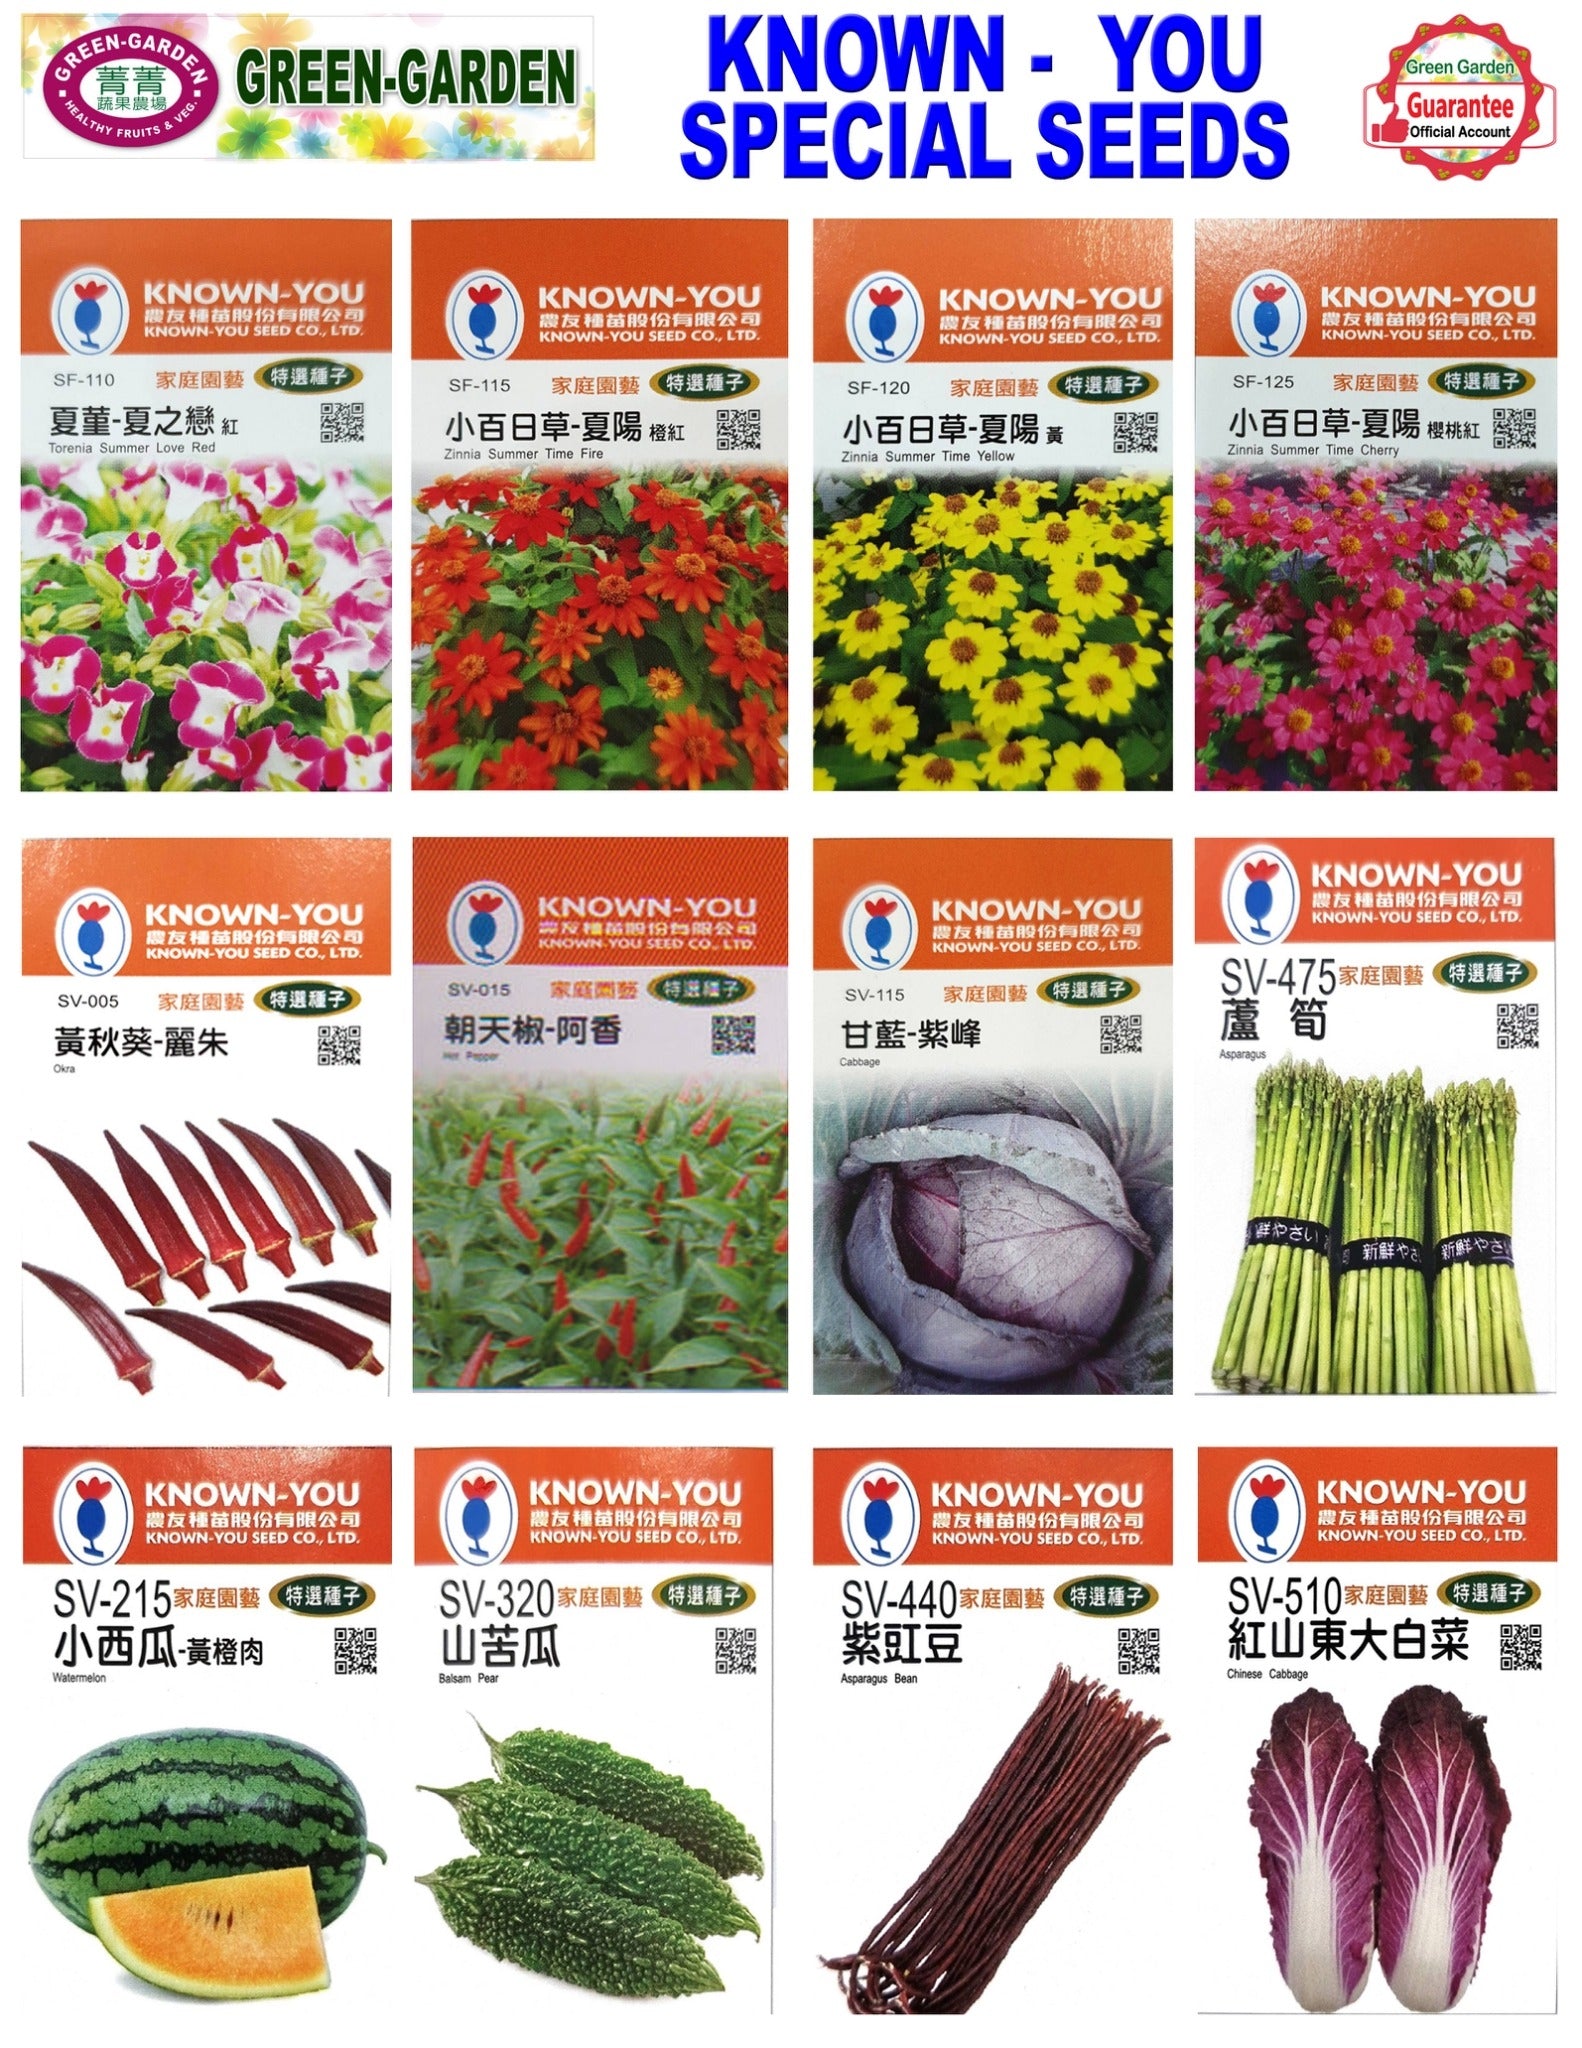 Known You Special Seeds (SV-005 Okra (Red)